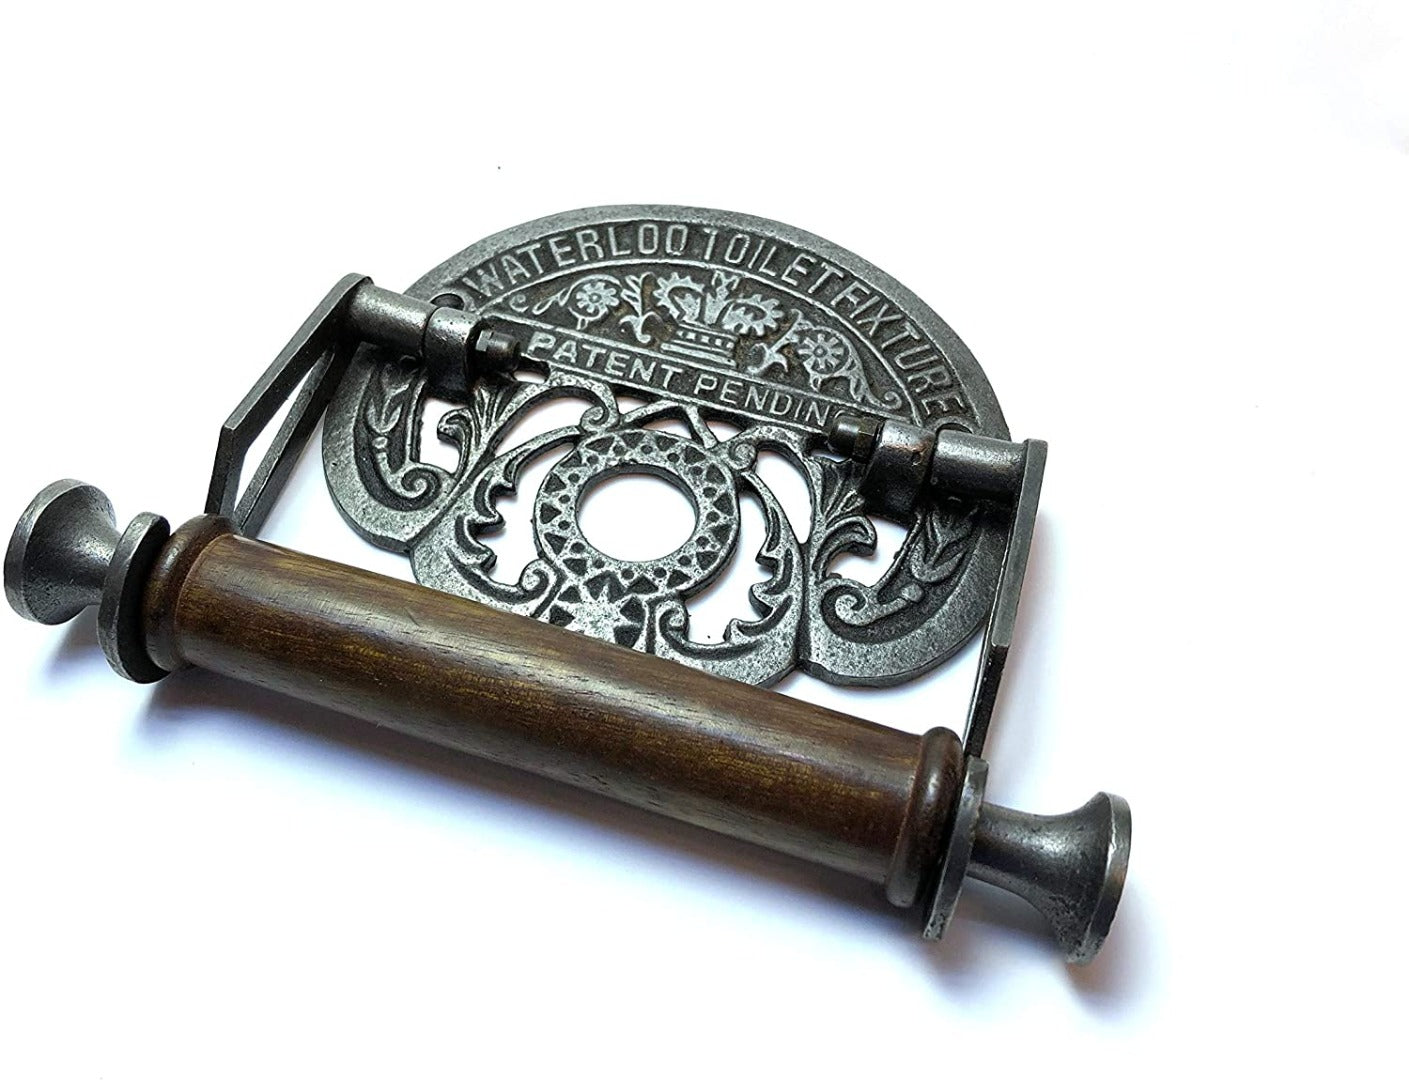 Waterloo Toilet Roll Holder - Antique Iron unique accessory design for your bathroom